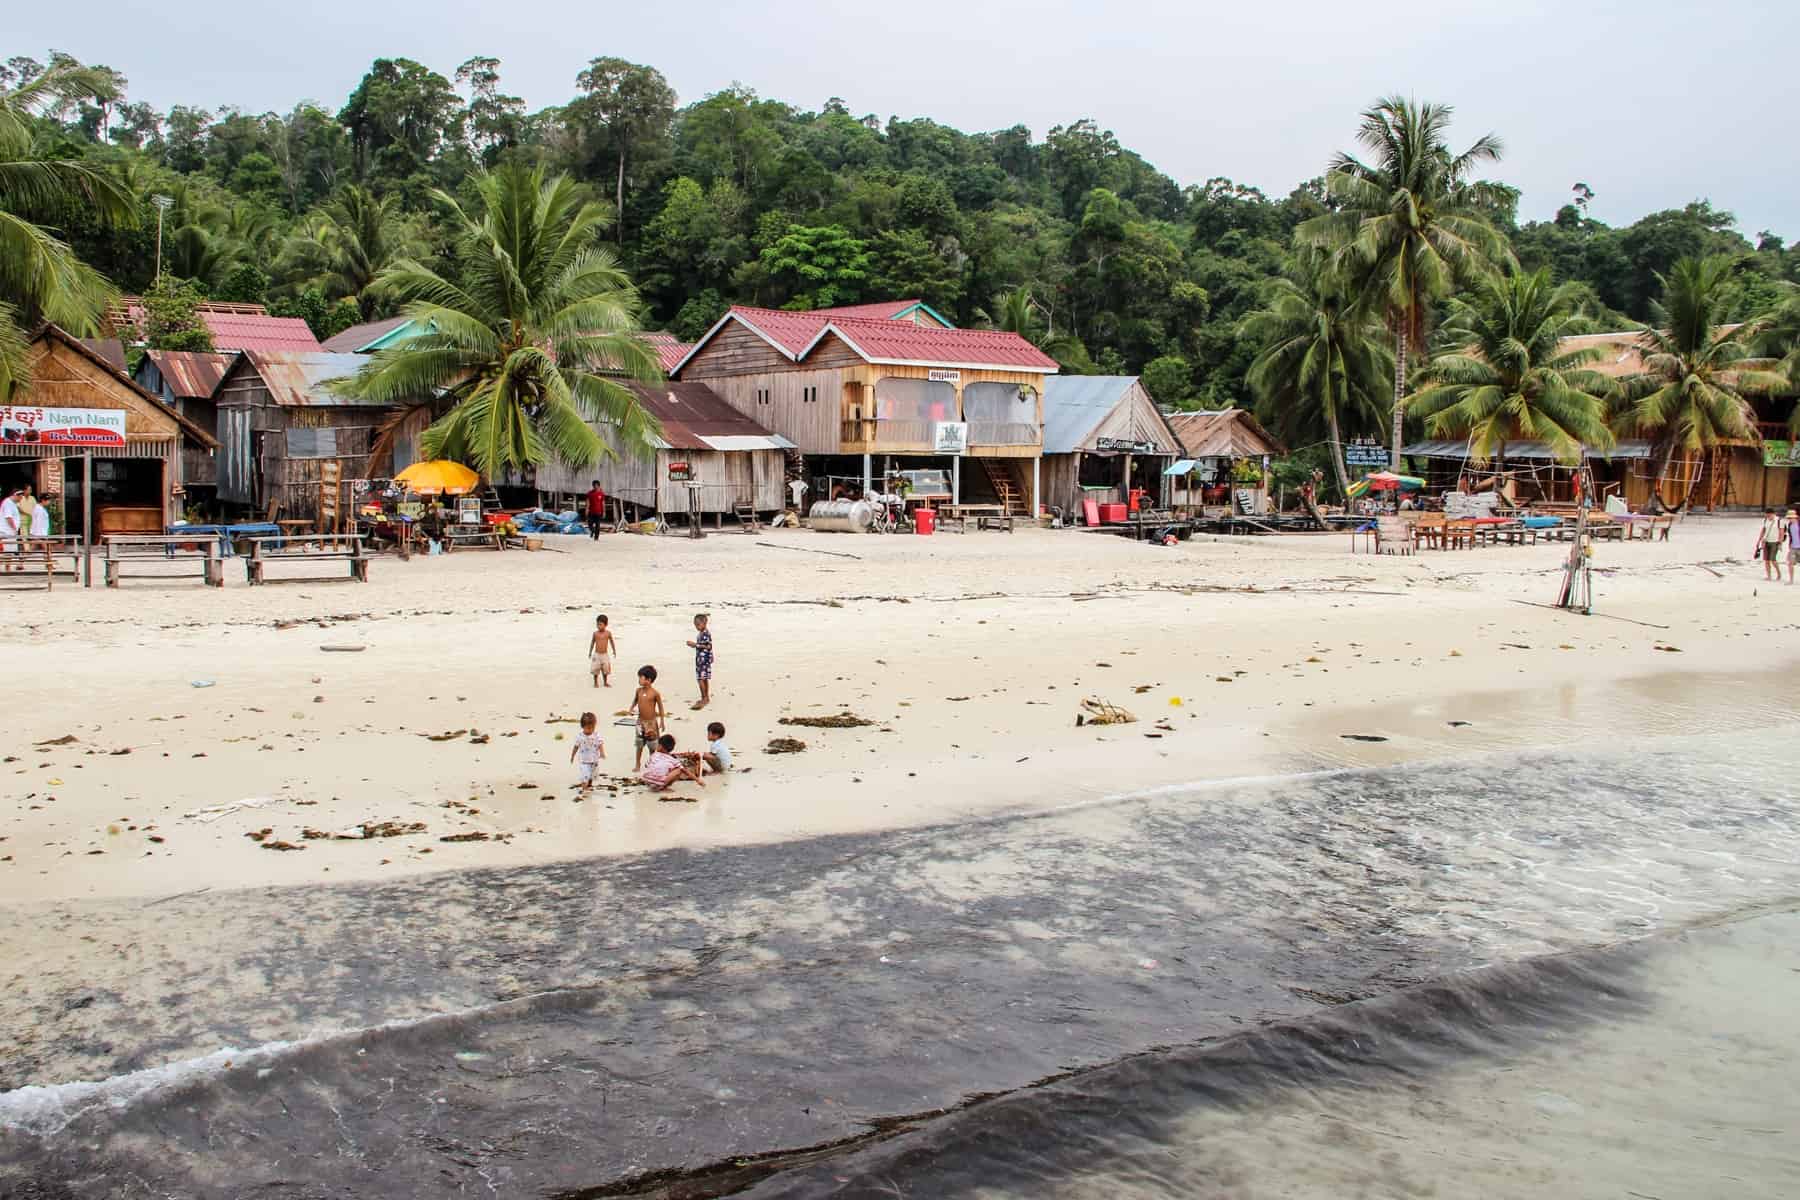 A group of six children gather on the beach of Koh Rong Cambodia, with beach huts in the background, surrounded by jungle